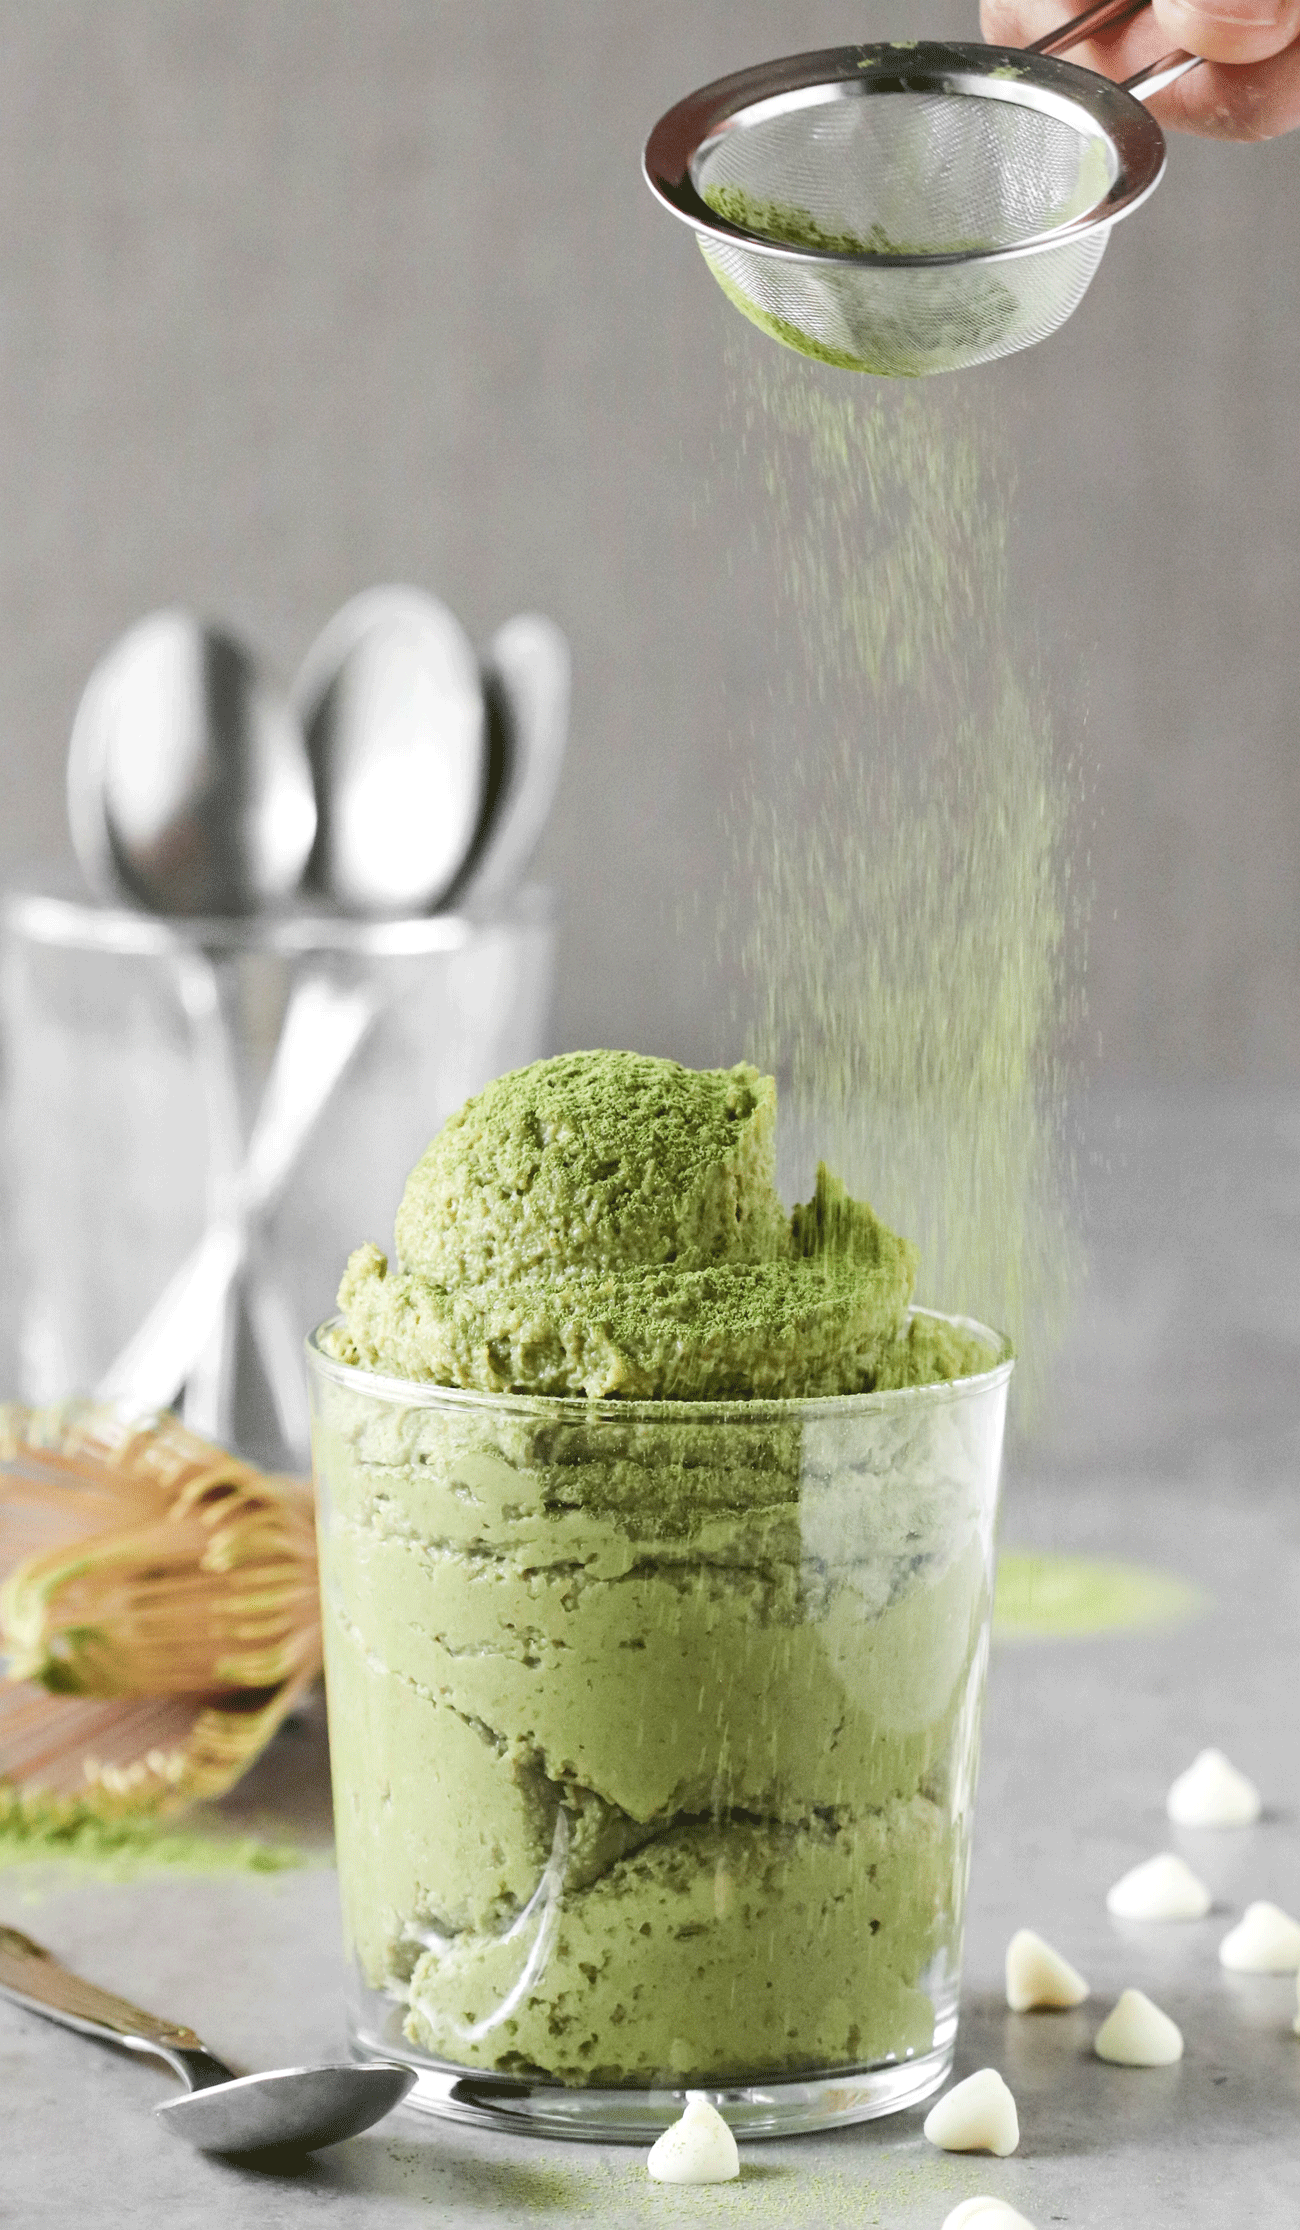 This Matcha Cookie Dough is fudgy, sweet, and sinful-tasting, yet it's healthy! Made with nut butter, oats, protein powder (optional), and a secret ingredient. You'd never know this is sugar free, gluten free, high protein, and high fiber too!